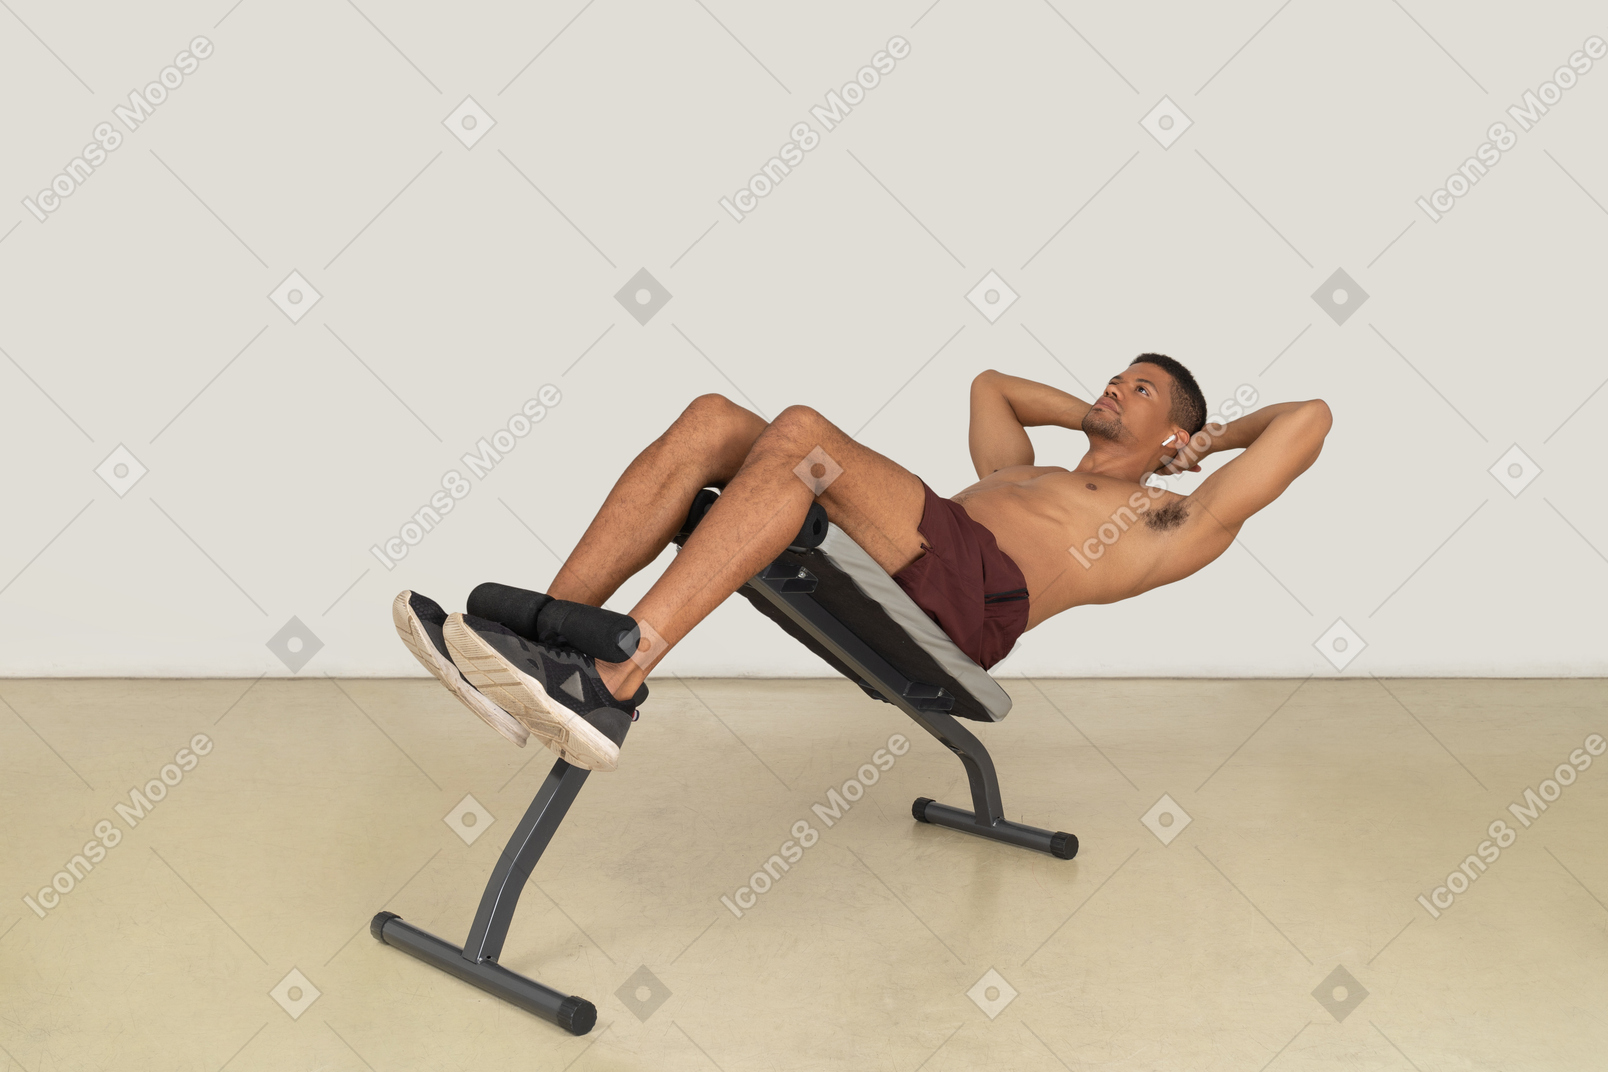 Young muscular man working out on weight bench